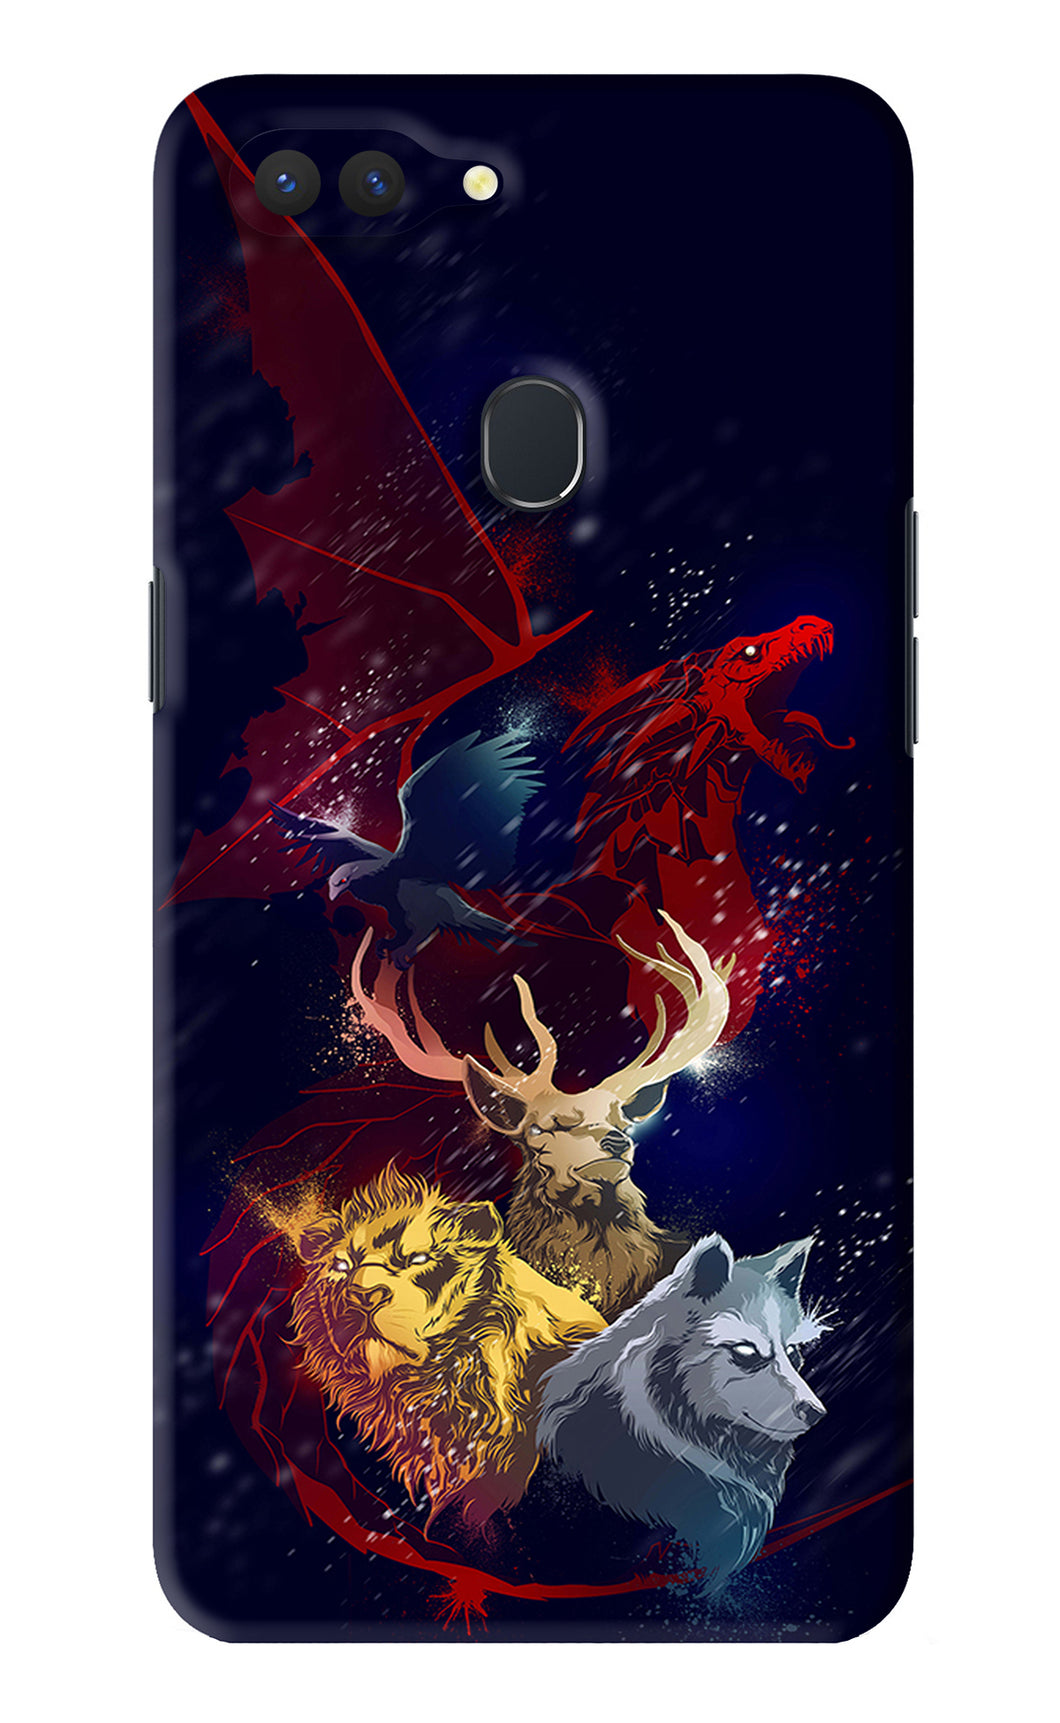 Game Of Thrones Realme 2 Back Skin Wrap